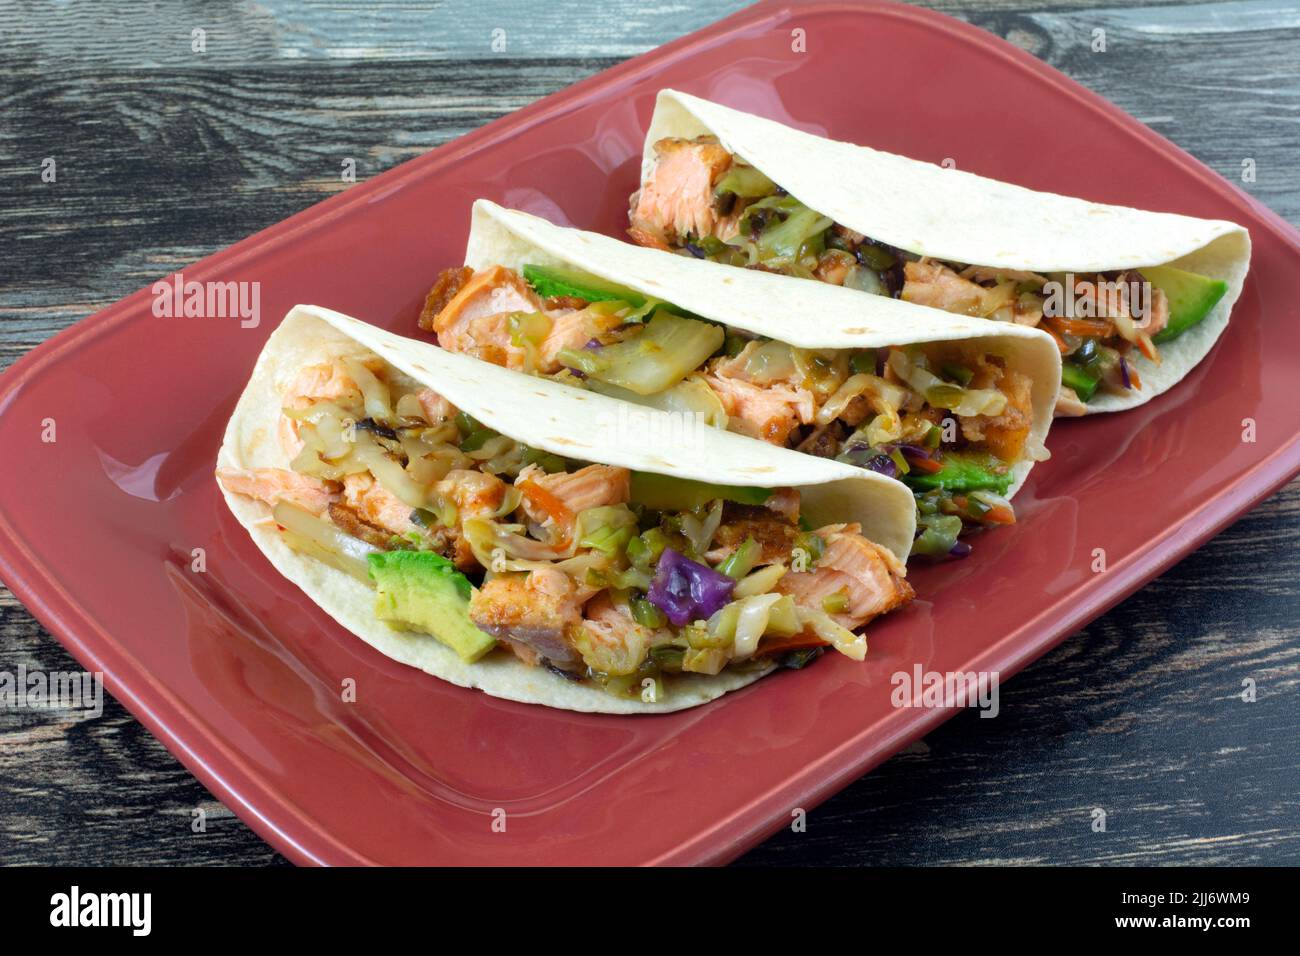 Three salmon tacos with avocado and vegetables on red serving plate Stock Photo